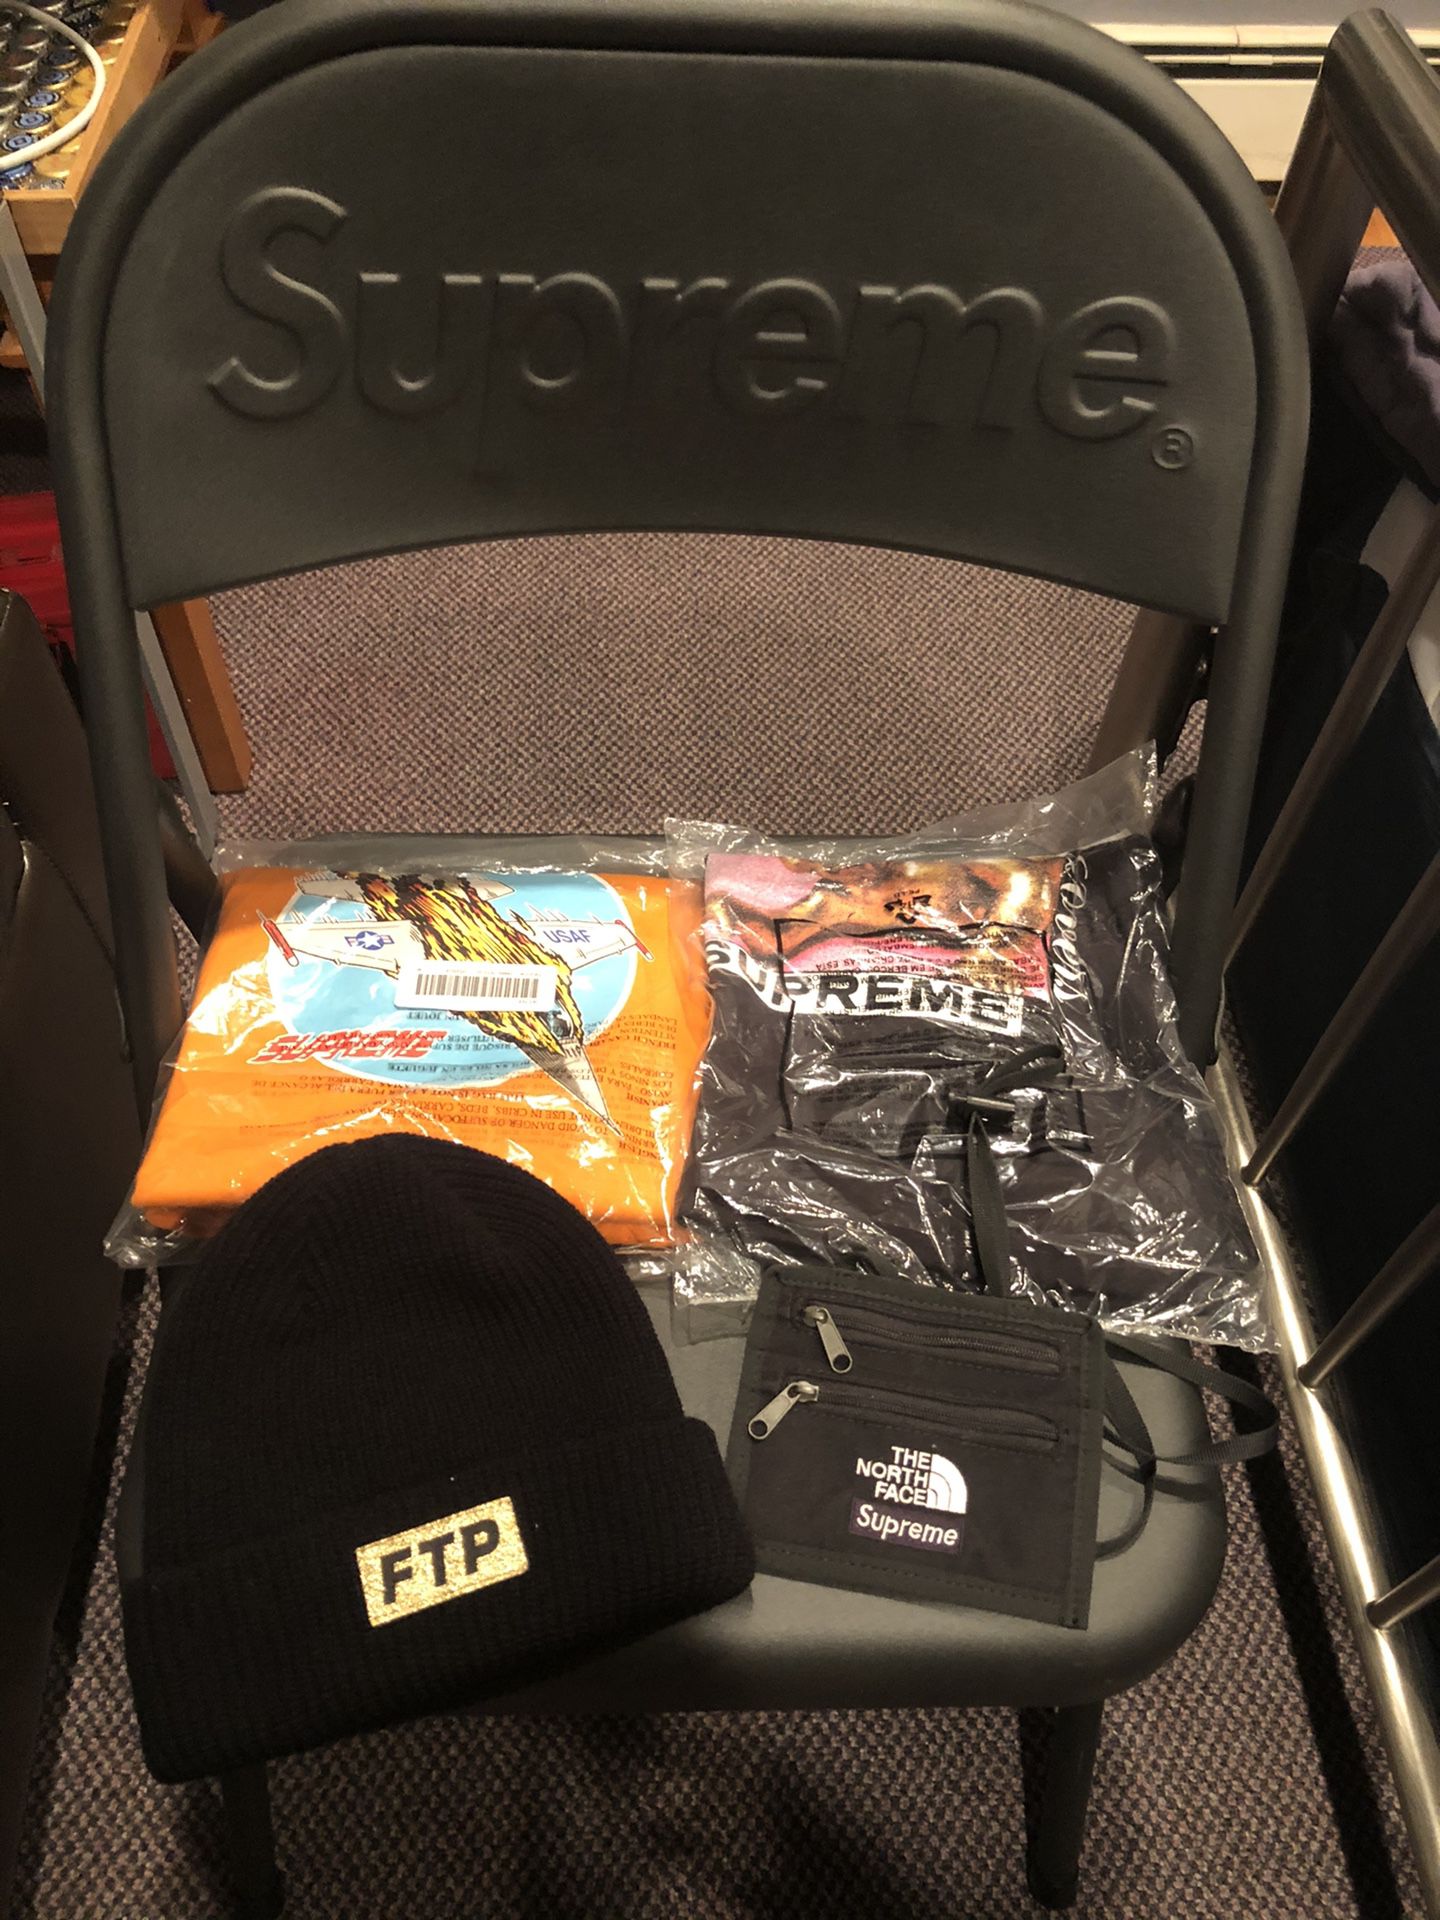 Supreme tees and accessories